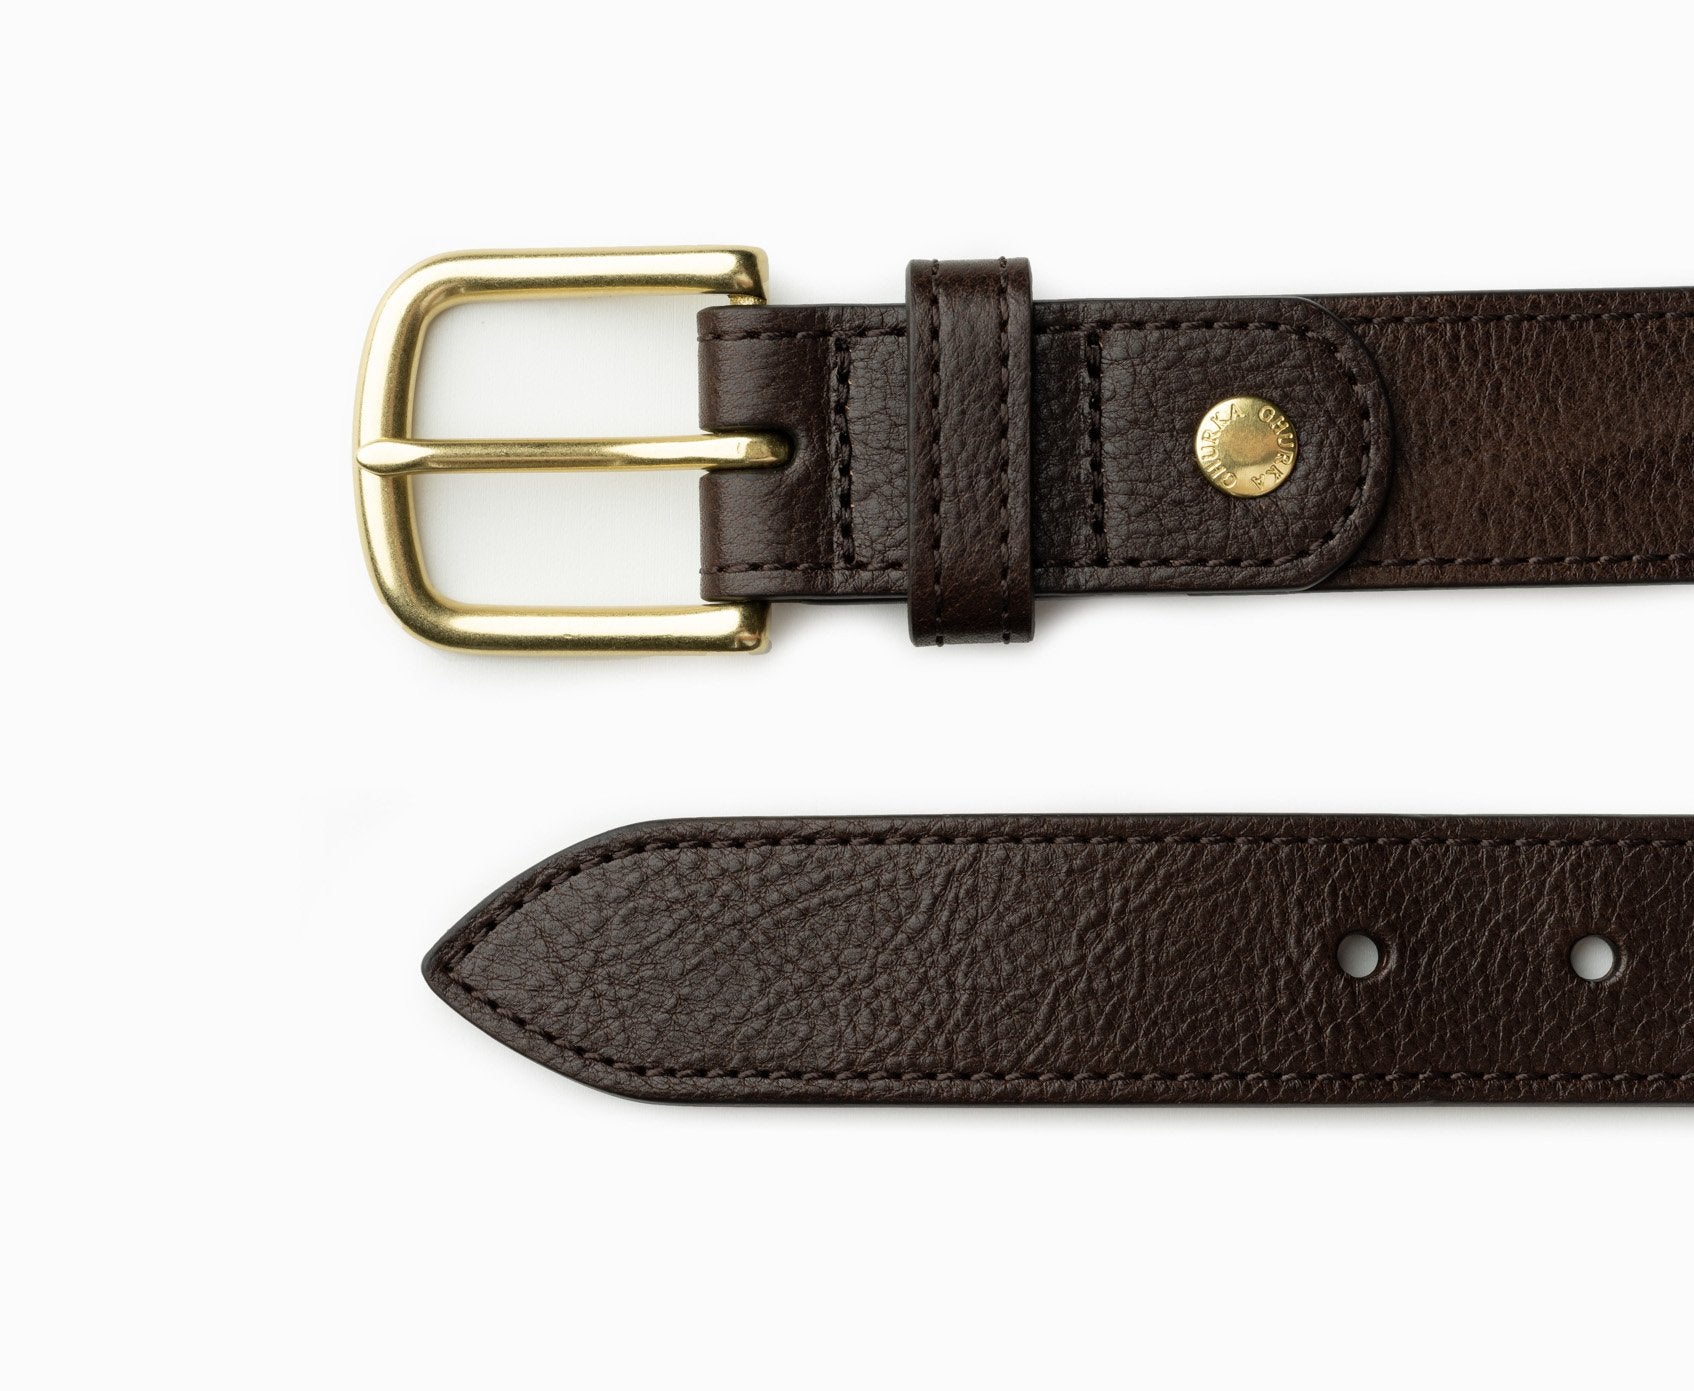 GhoDho Cruelty Free Belt (Spiced Walnut) Belts at Chagrin